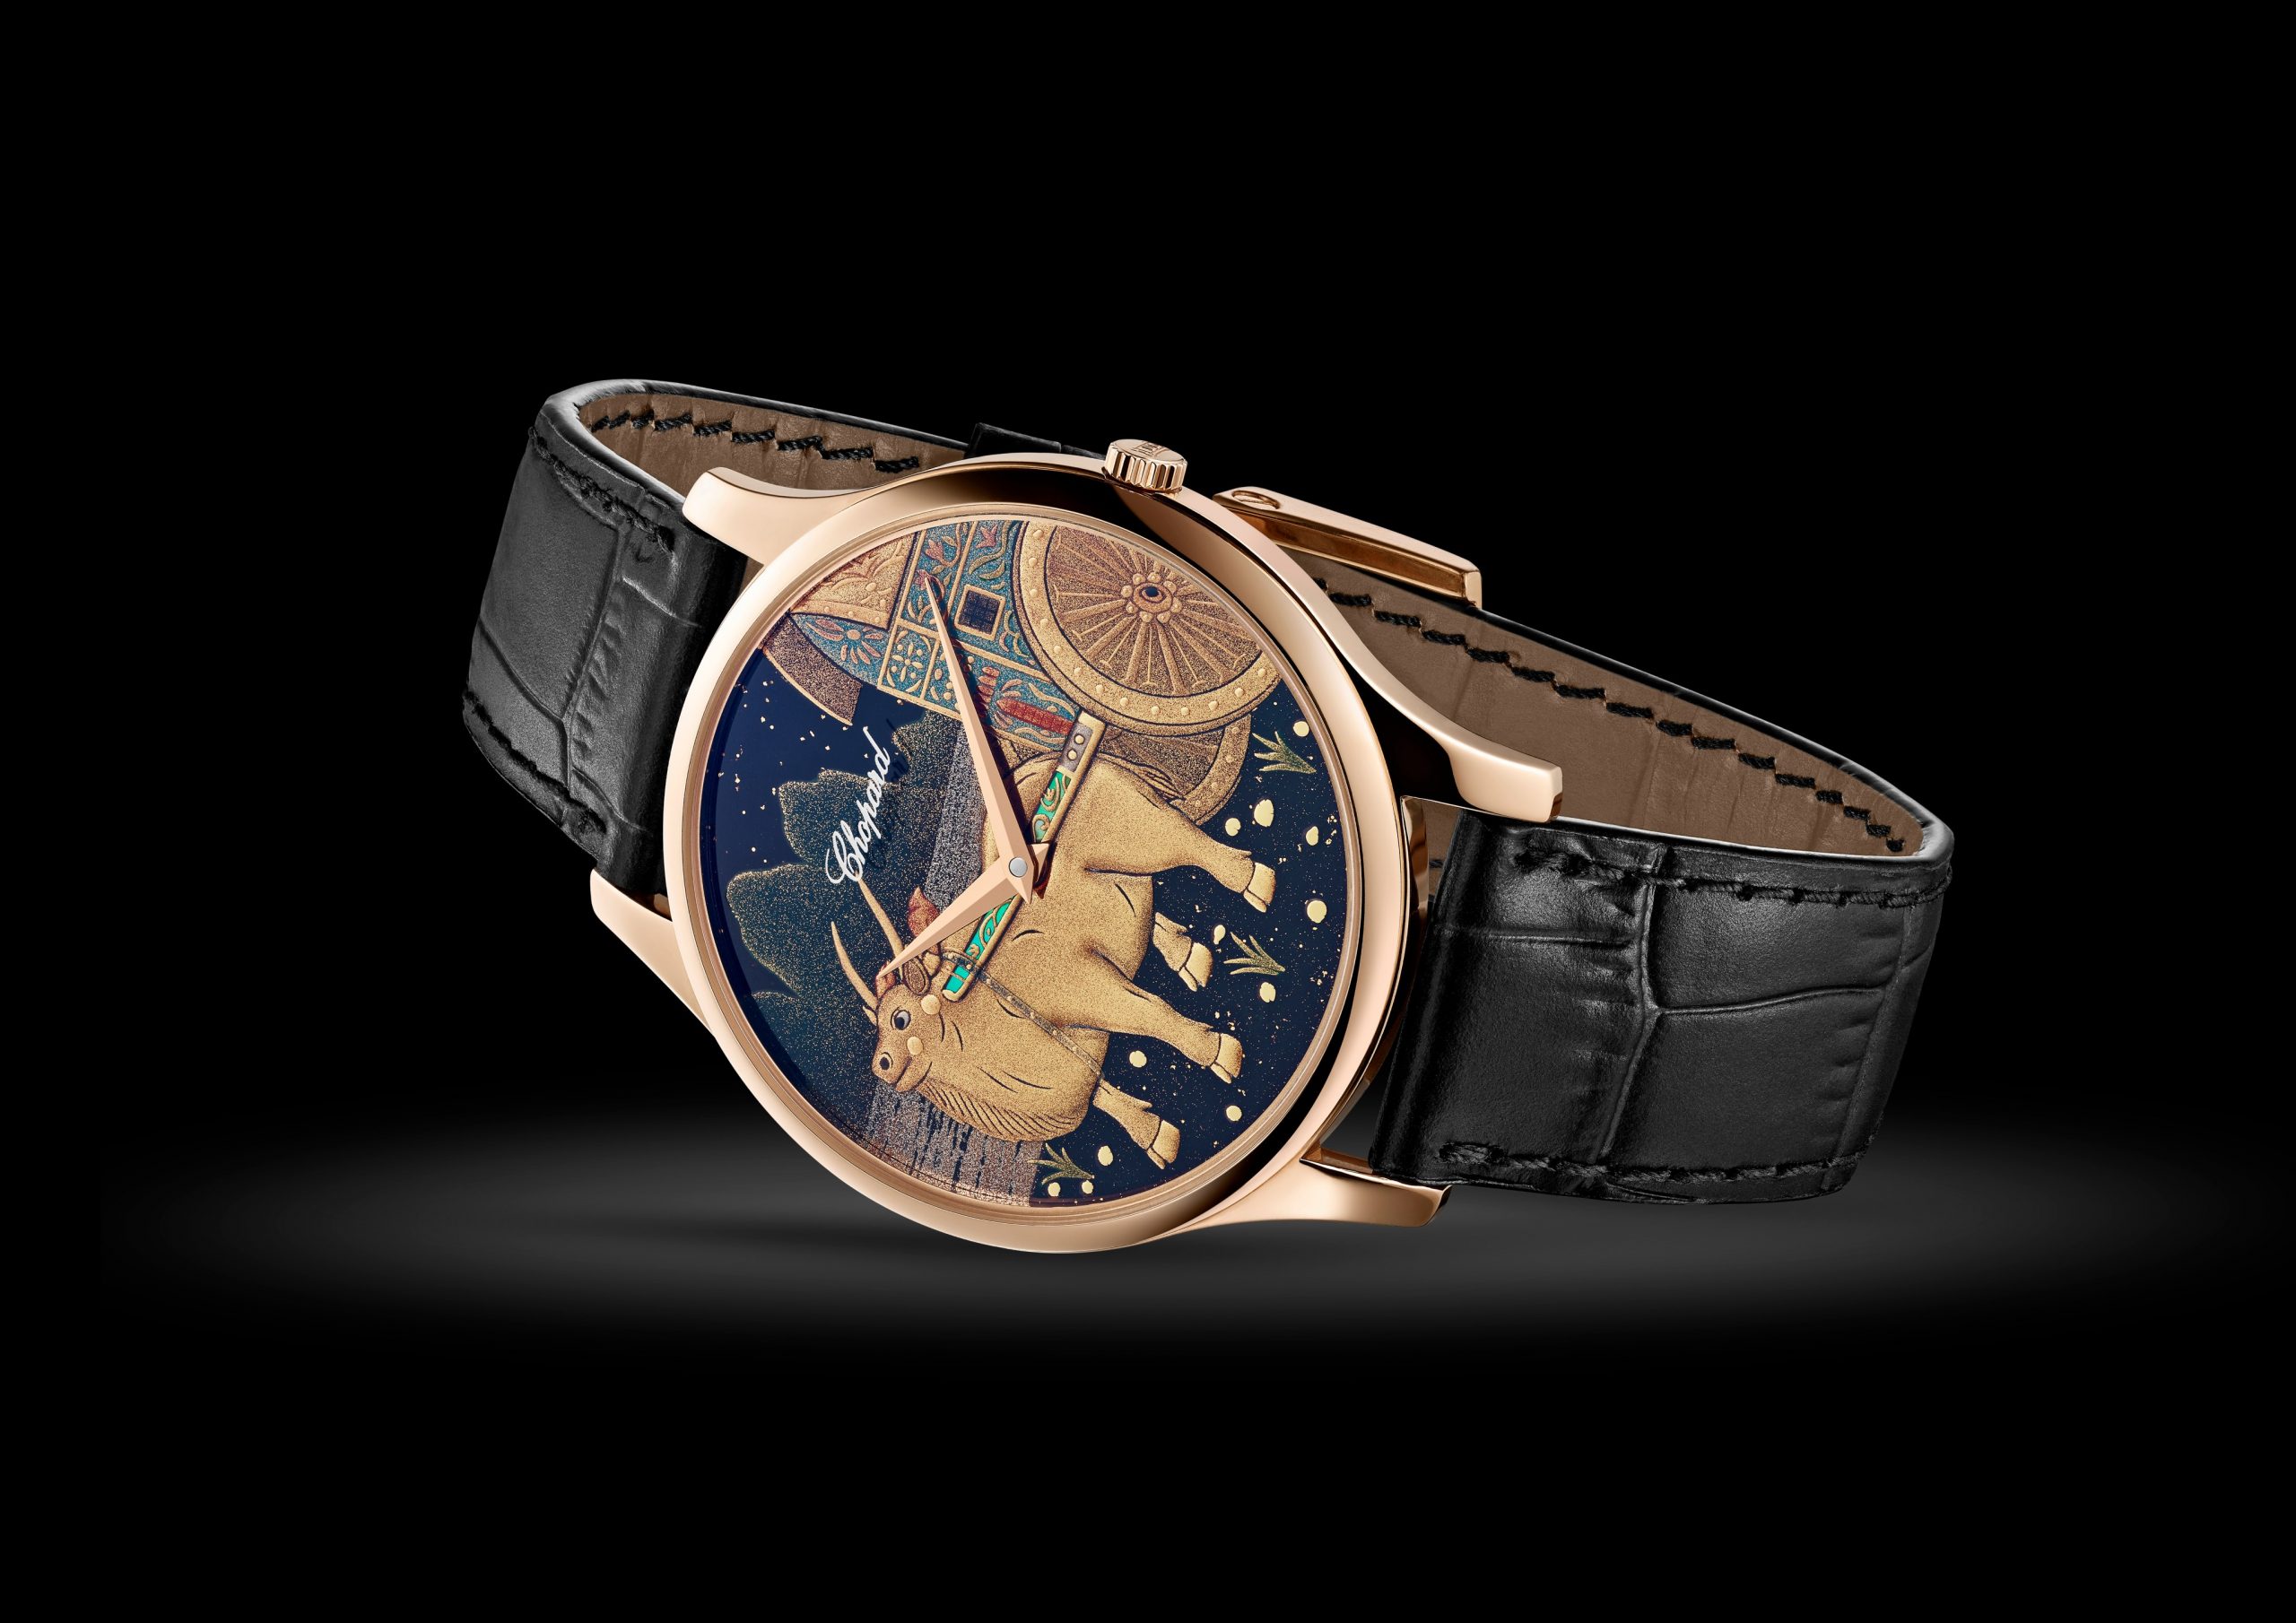 Louis Vuitton's Tambour Horizon Smartwatch Comes in 12 New Dials of Chinese  Zodiacs